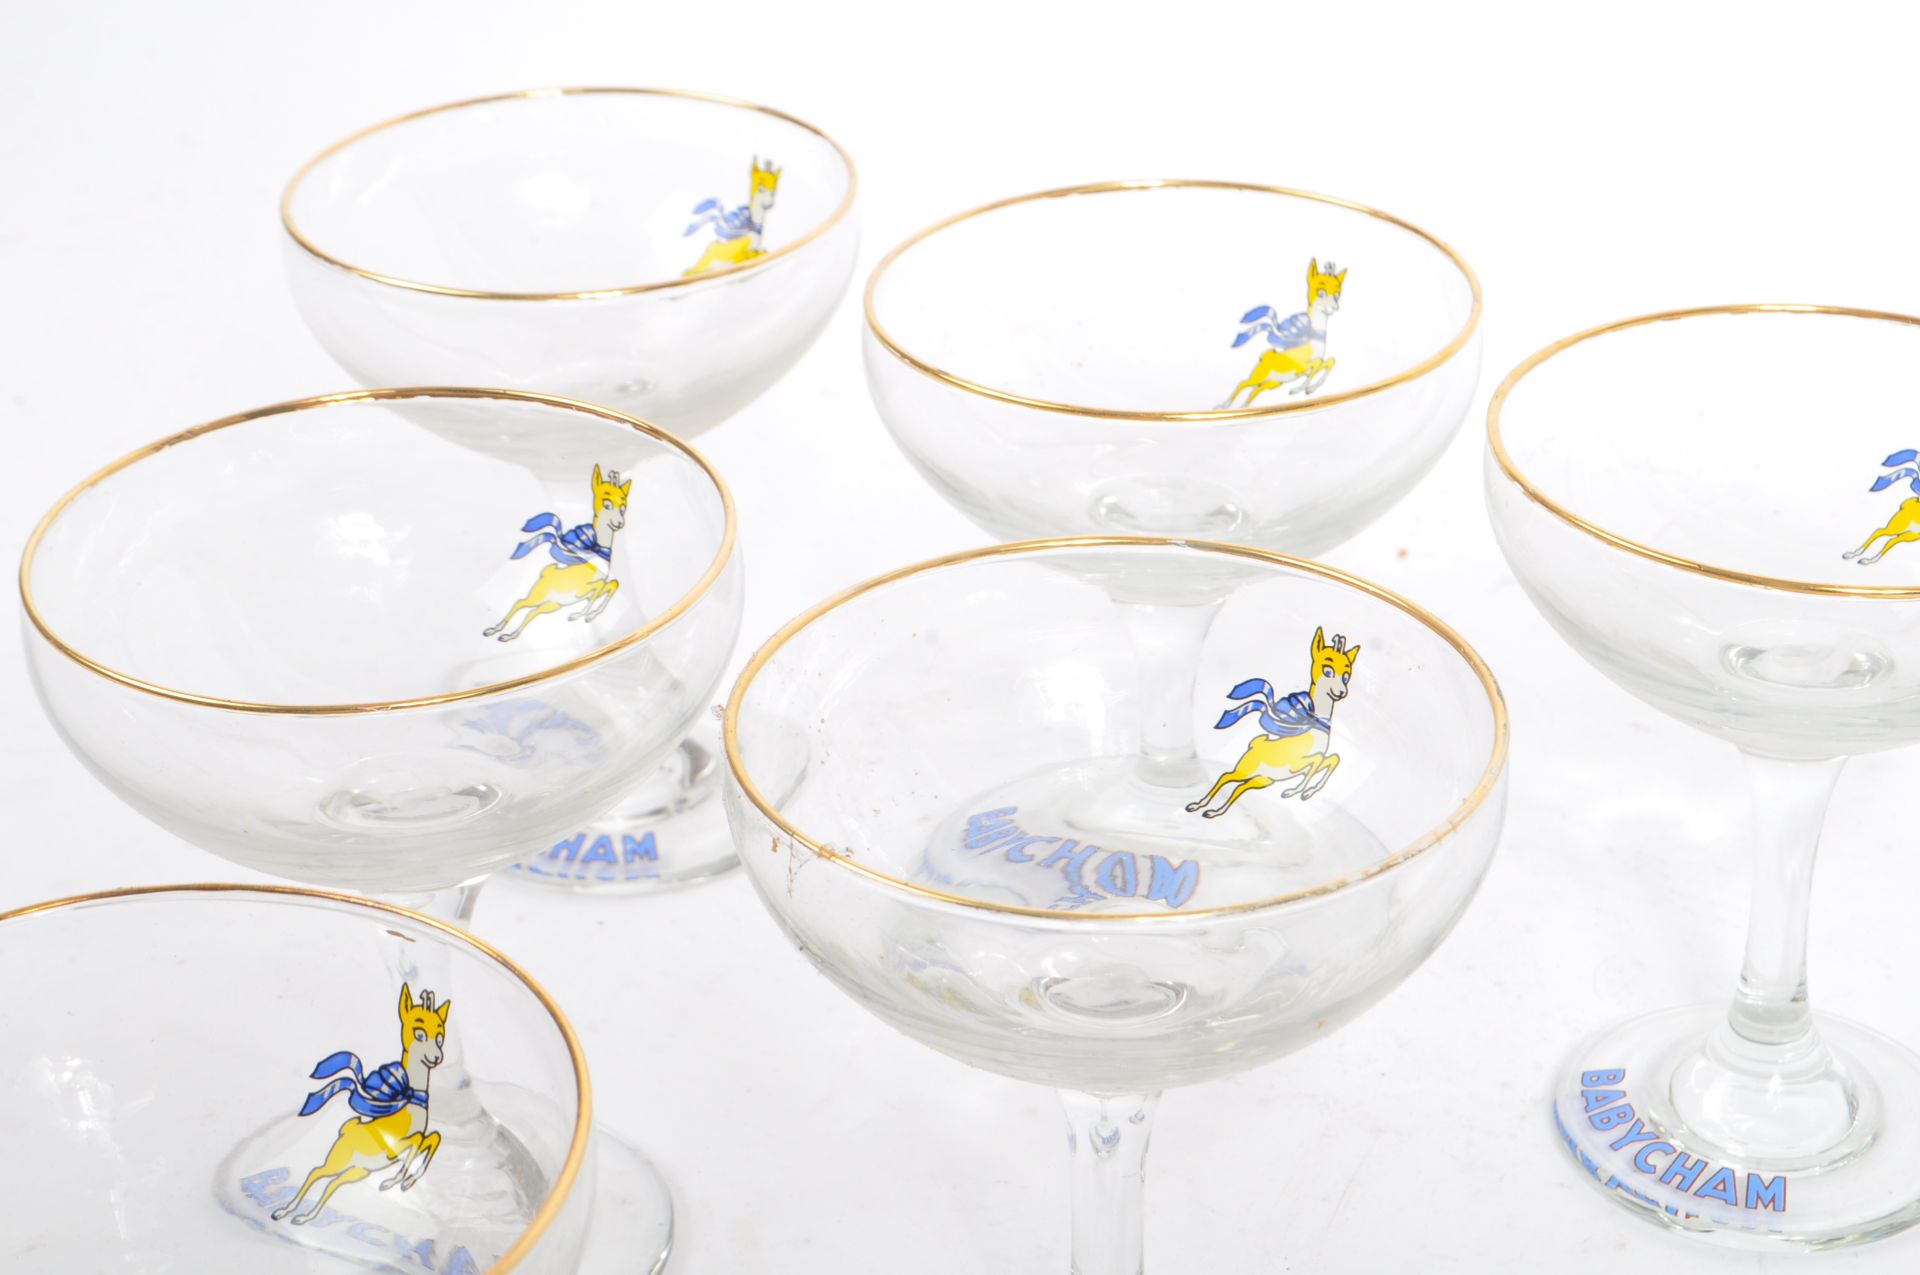 BABYCHAM - COLLECTION OF MID CENTURY COUPE GLASSES - Image 3 of 5